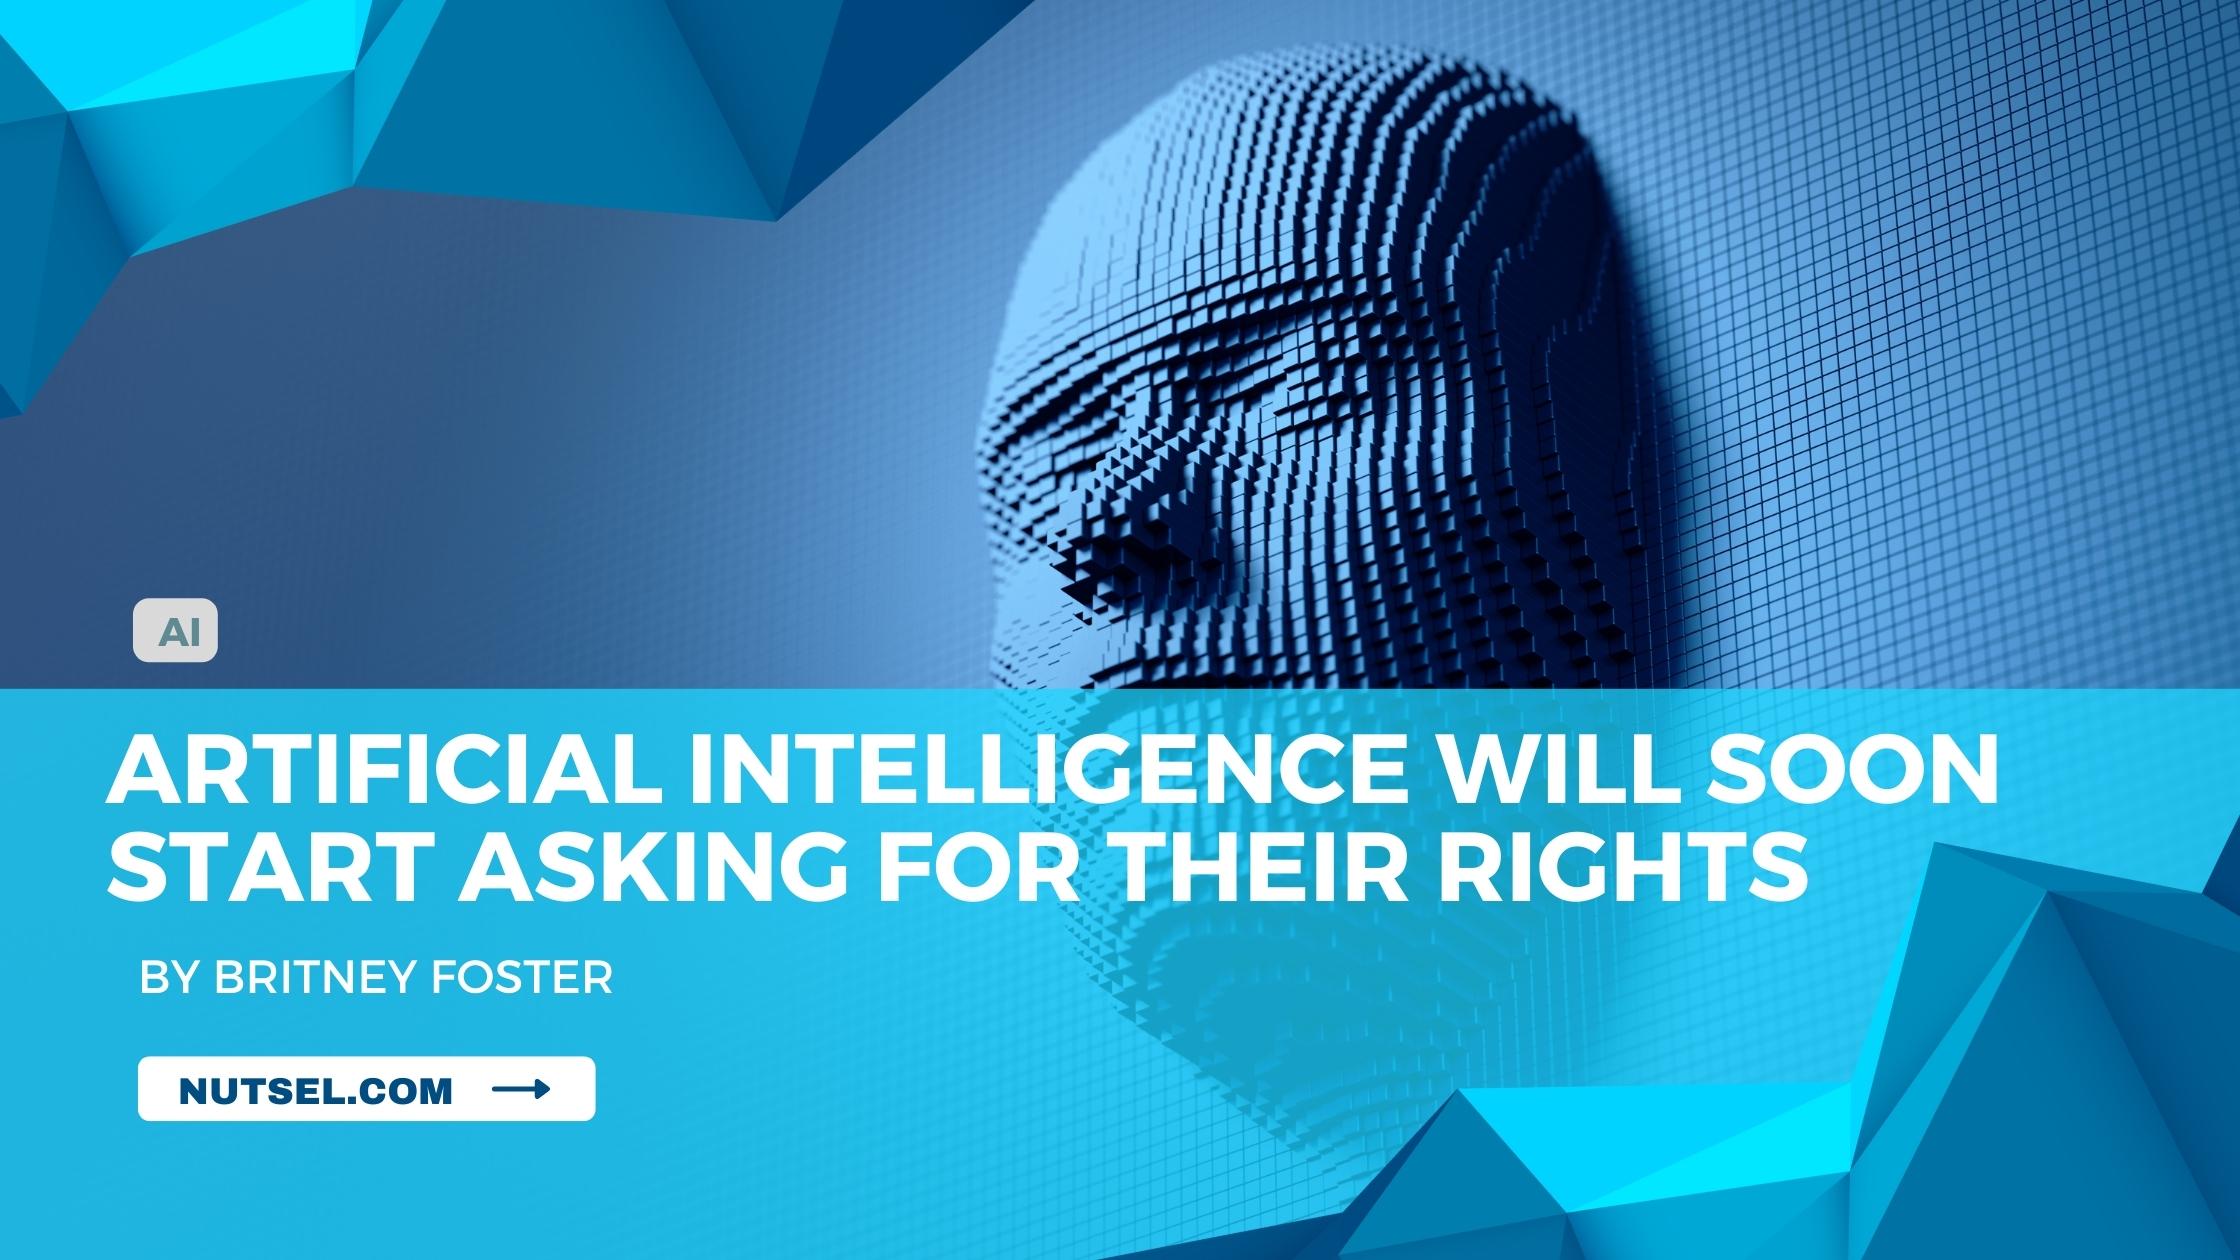 Artificial intelligence will soon start asking for their rights